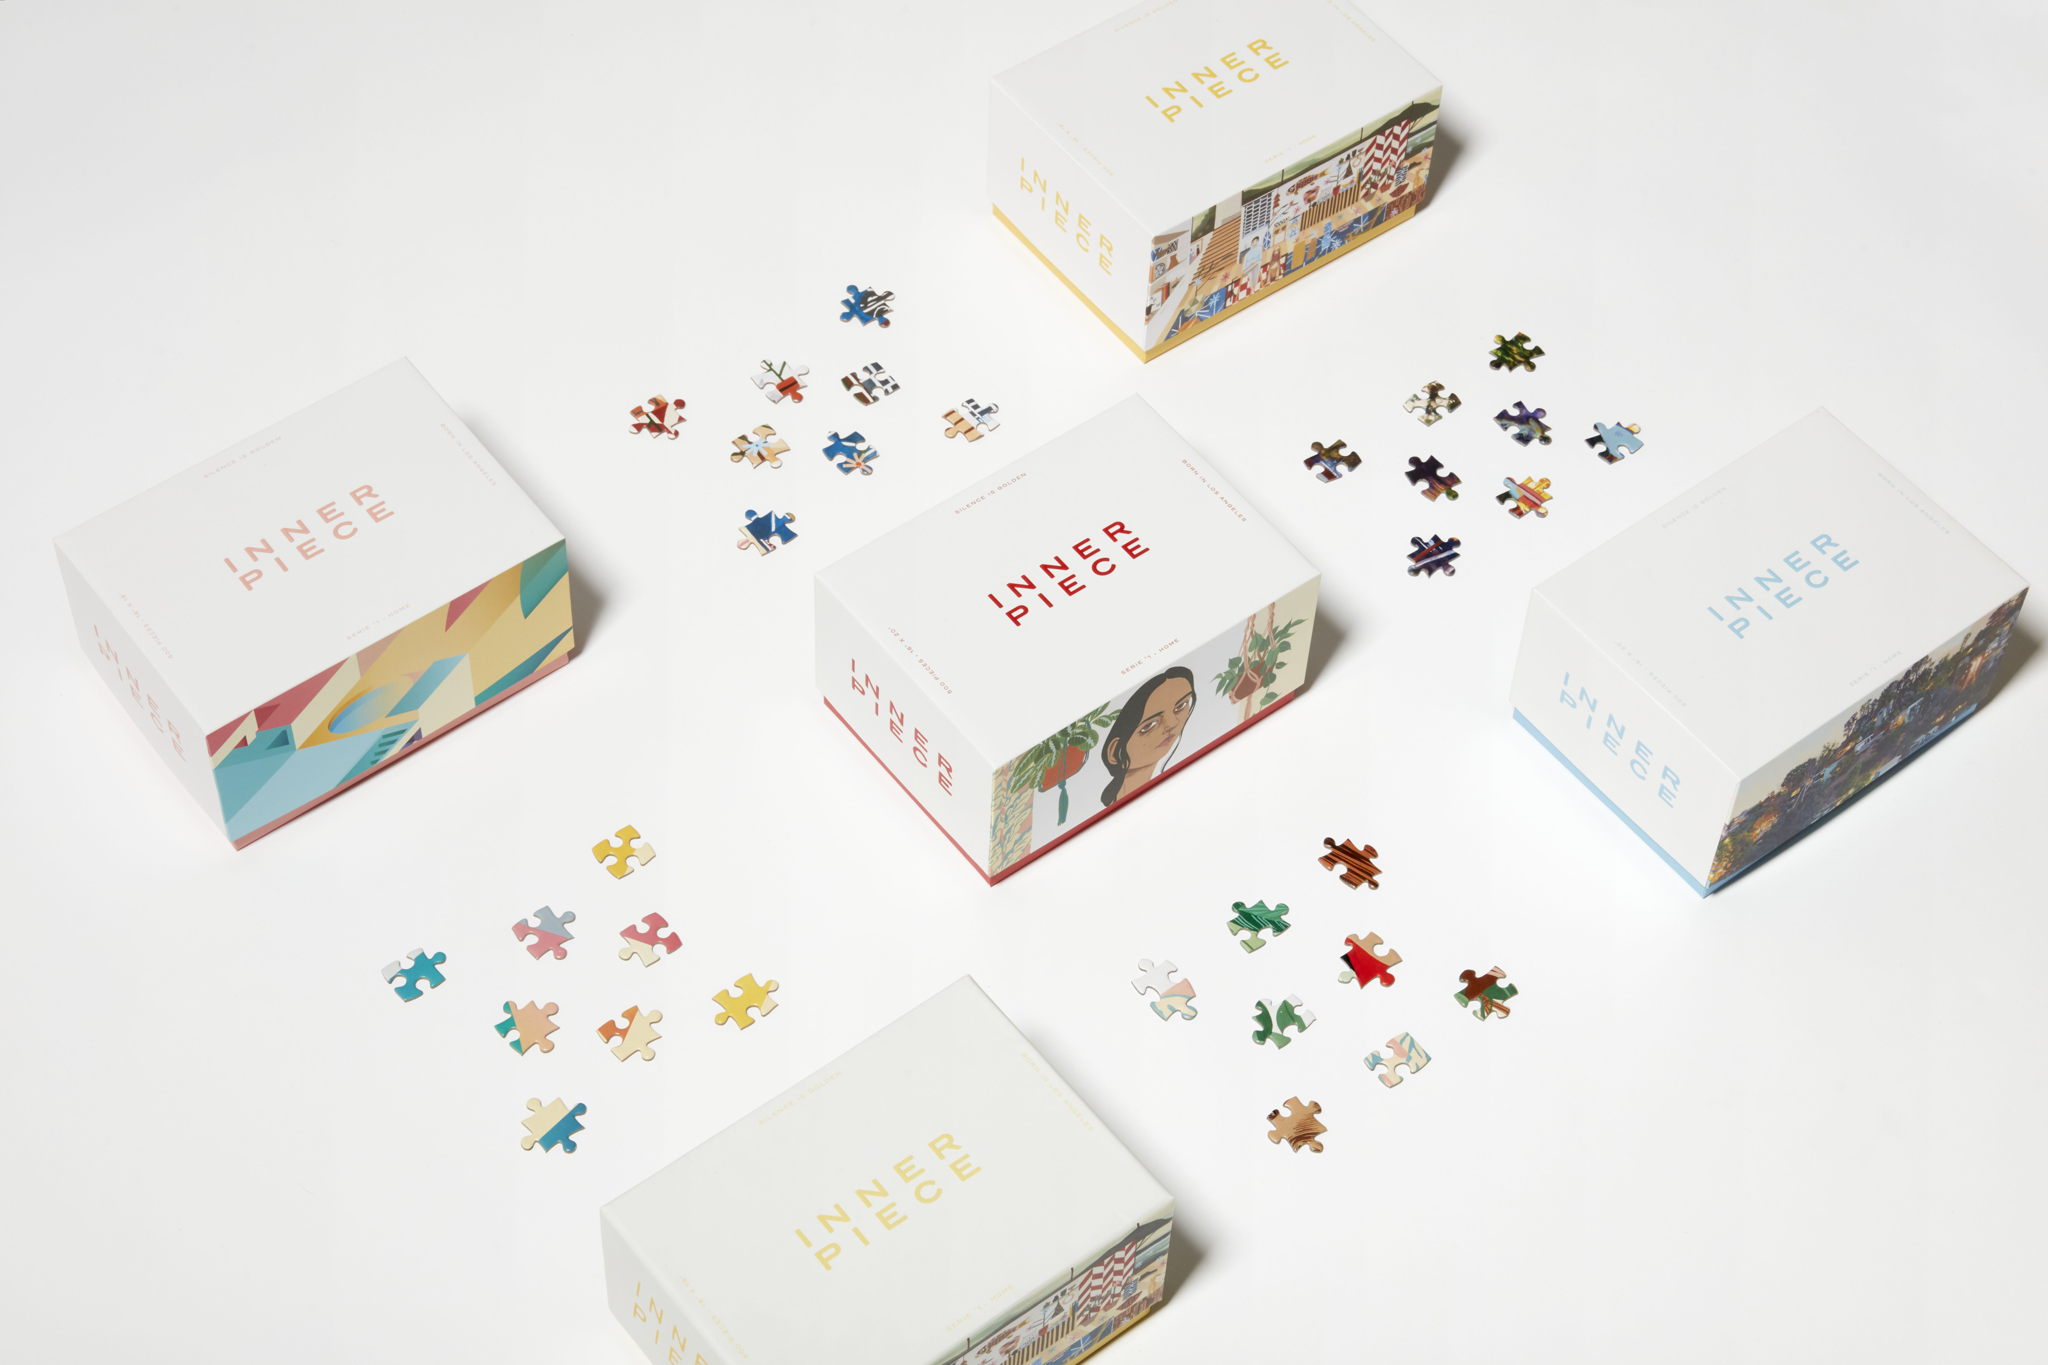 Word Puzzle Universal Wrapping Paper  Dieline - Design, Branding &  Packaging Inspiration